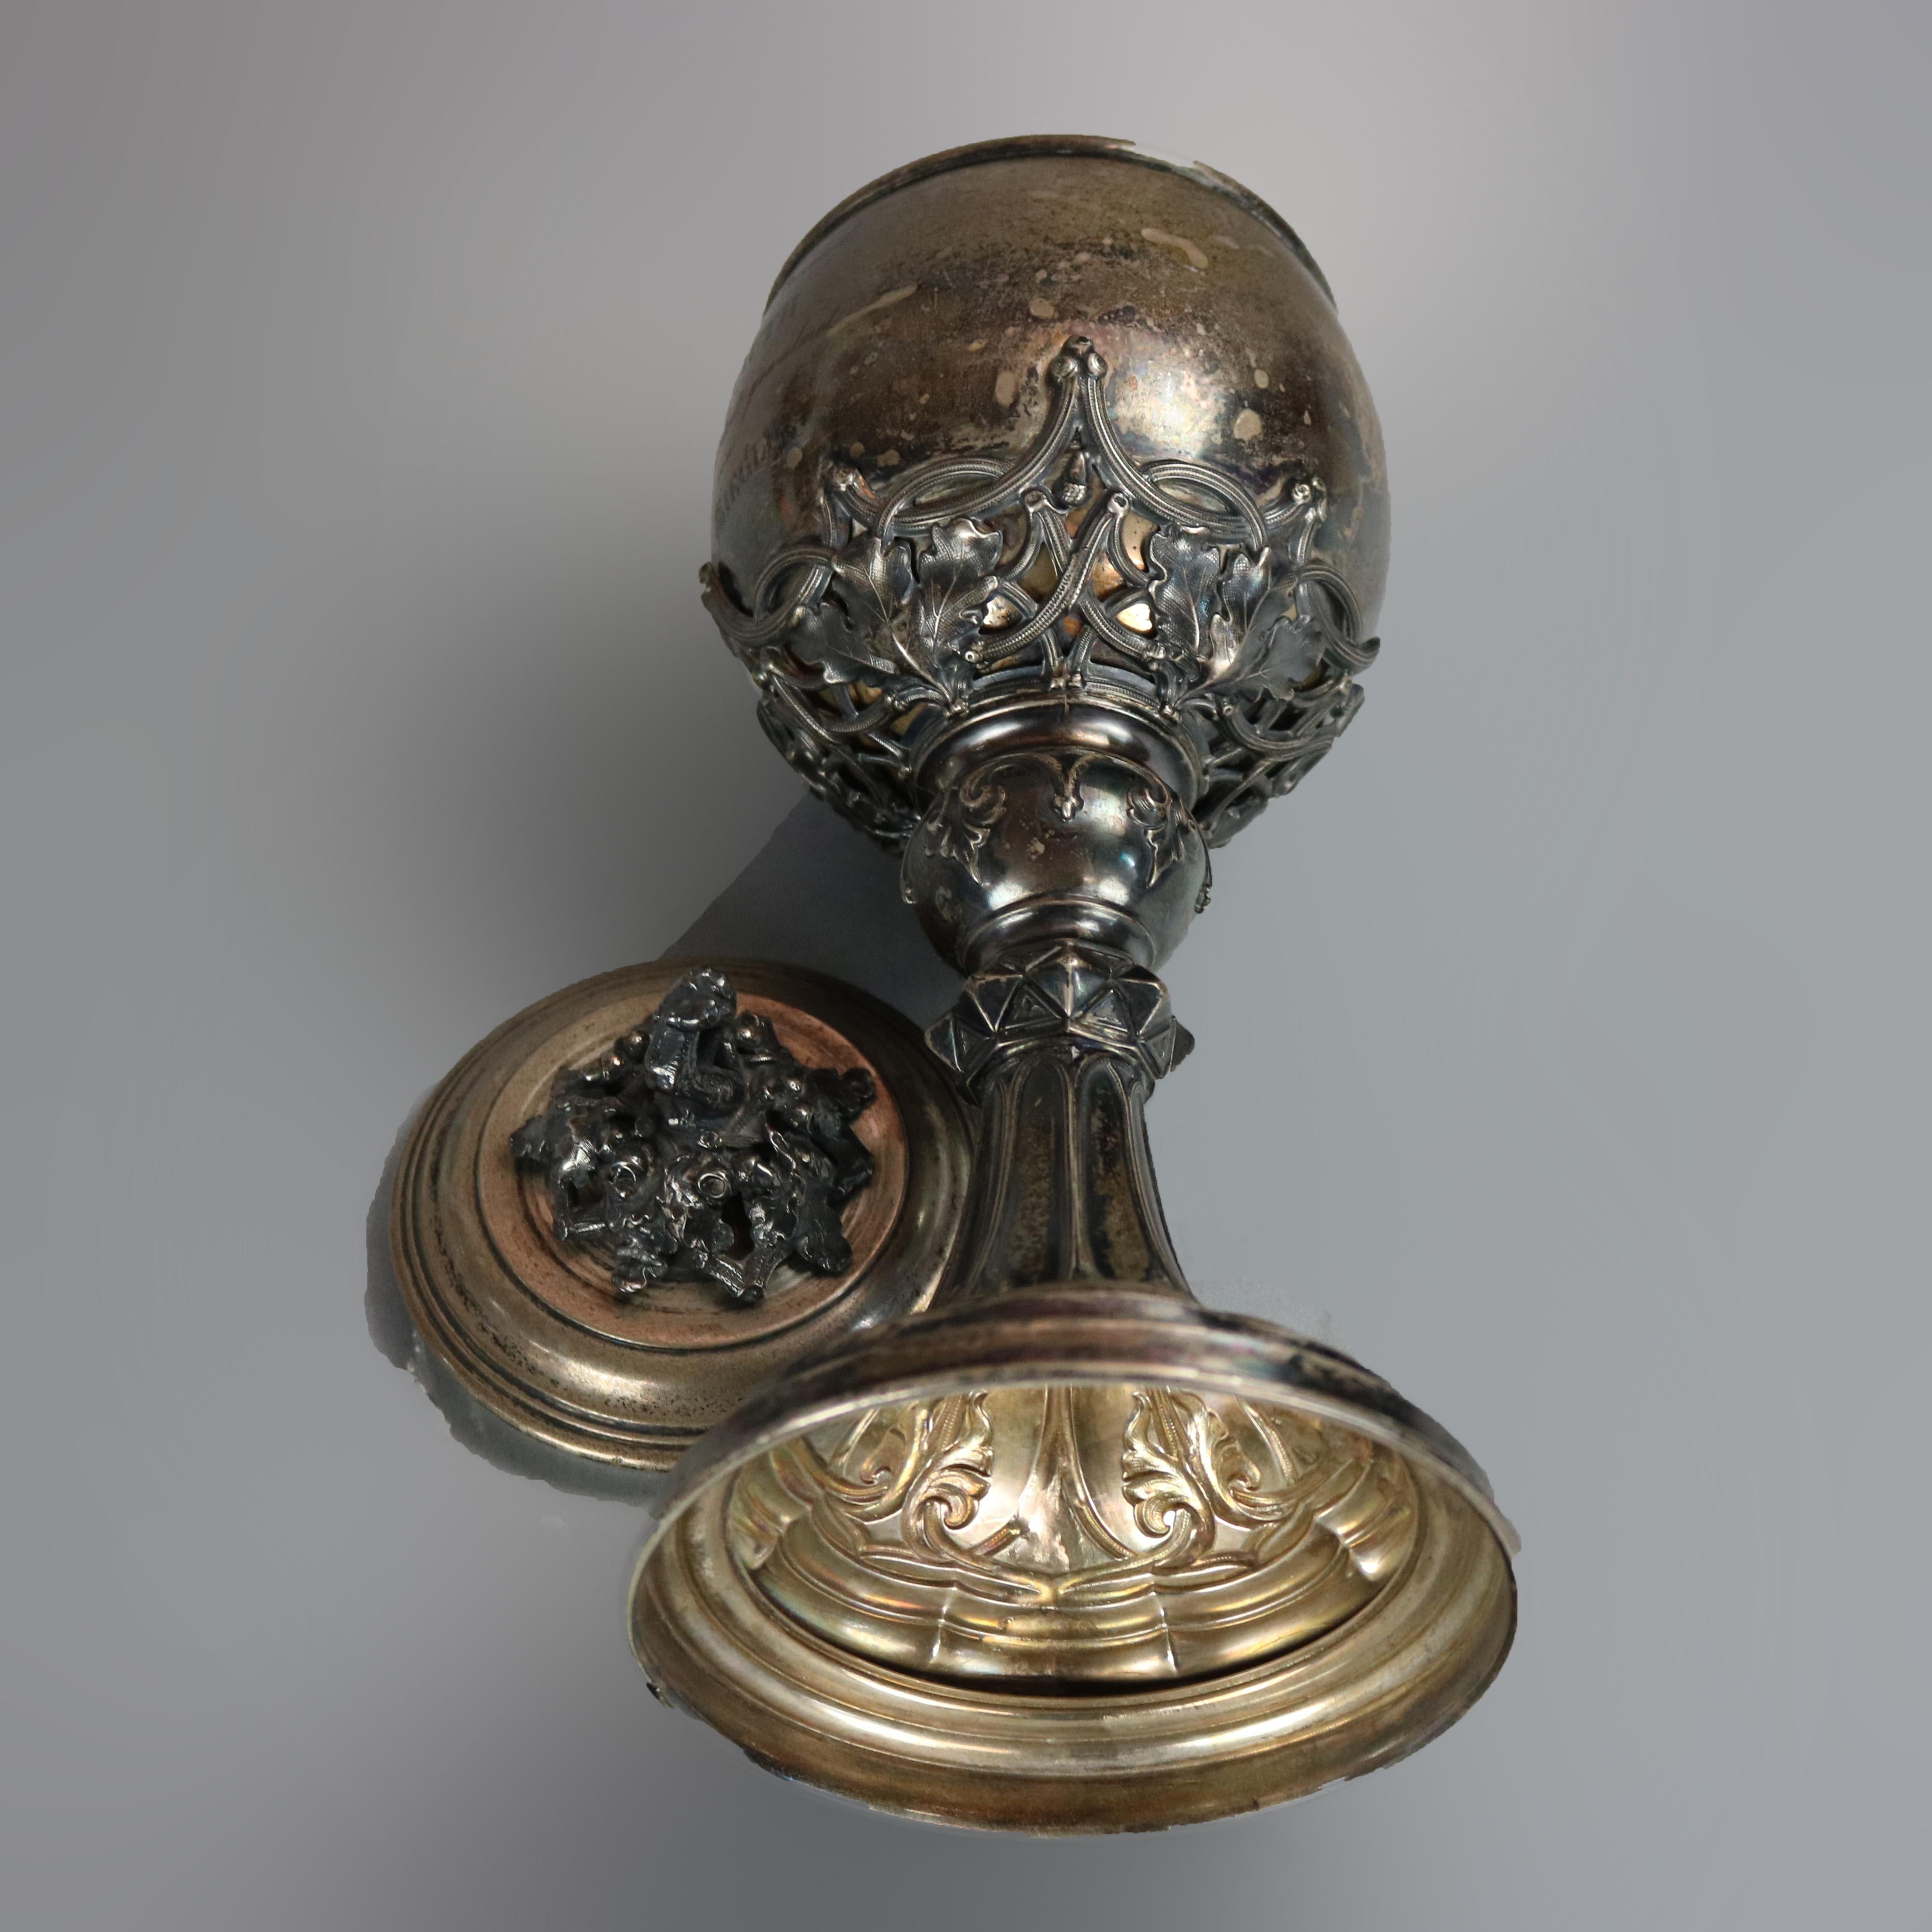 An antique German ceremonial chalice offers coin silver construction with cast oak leaf and branch form lid finial, bowl with gold wash interior and supported by scroll and oak leaf engraved, circa 1860

Measures: 11.75